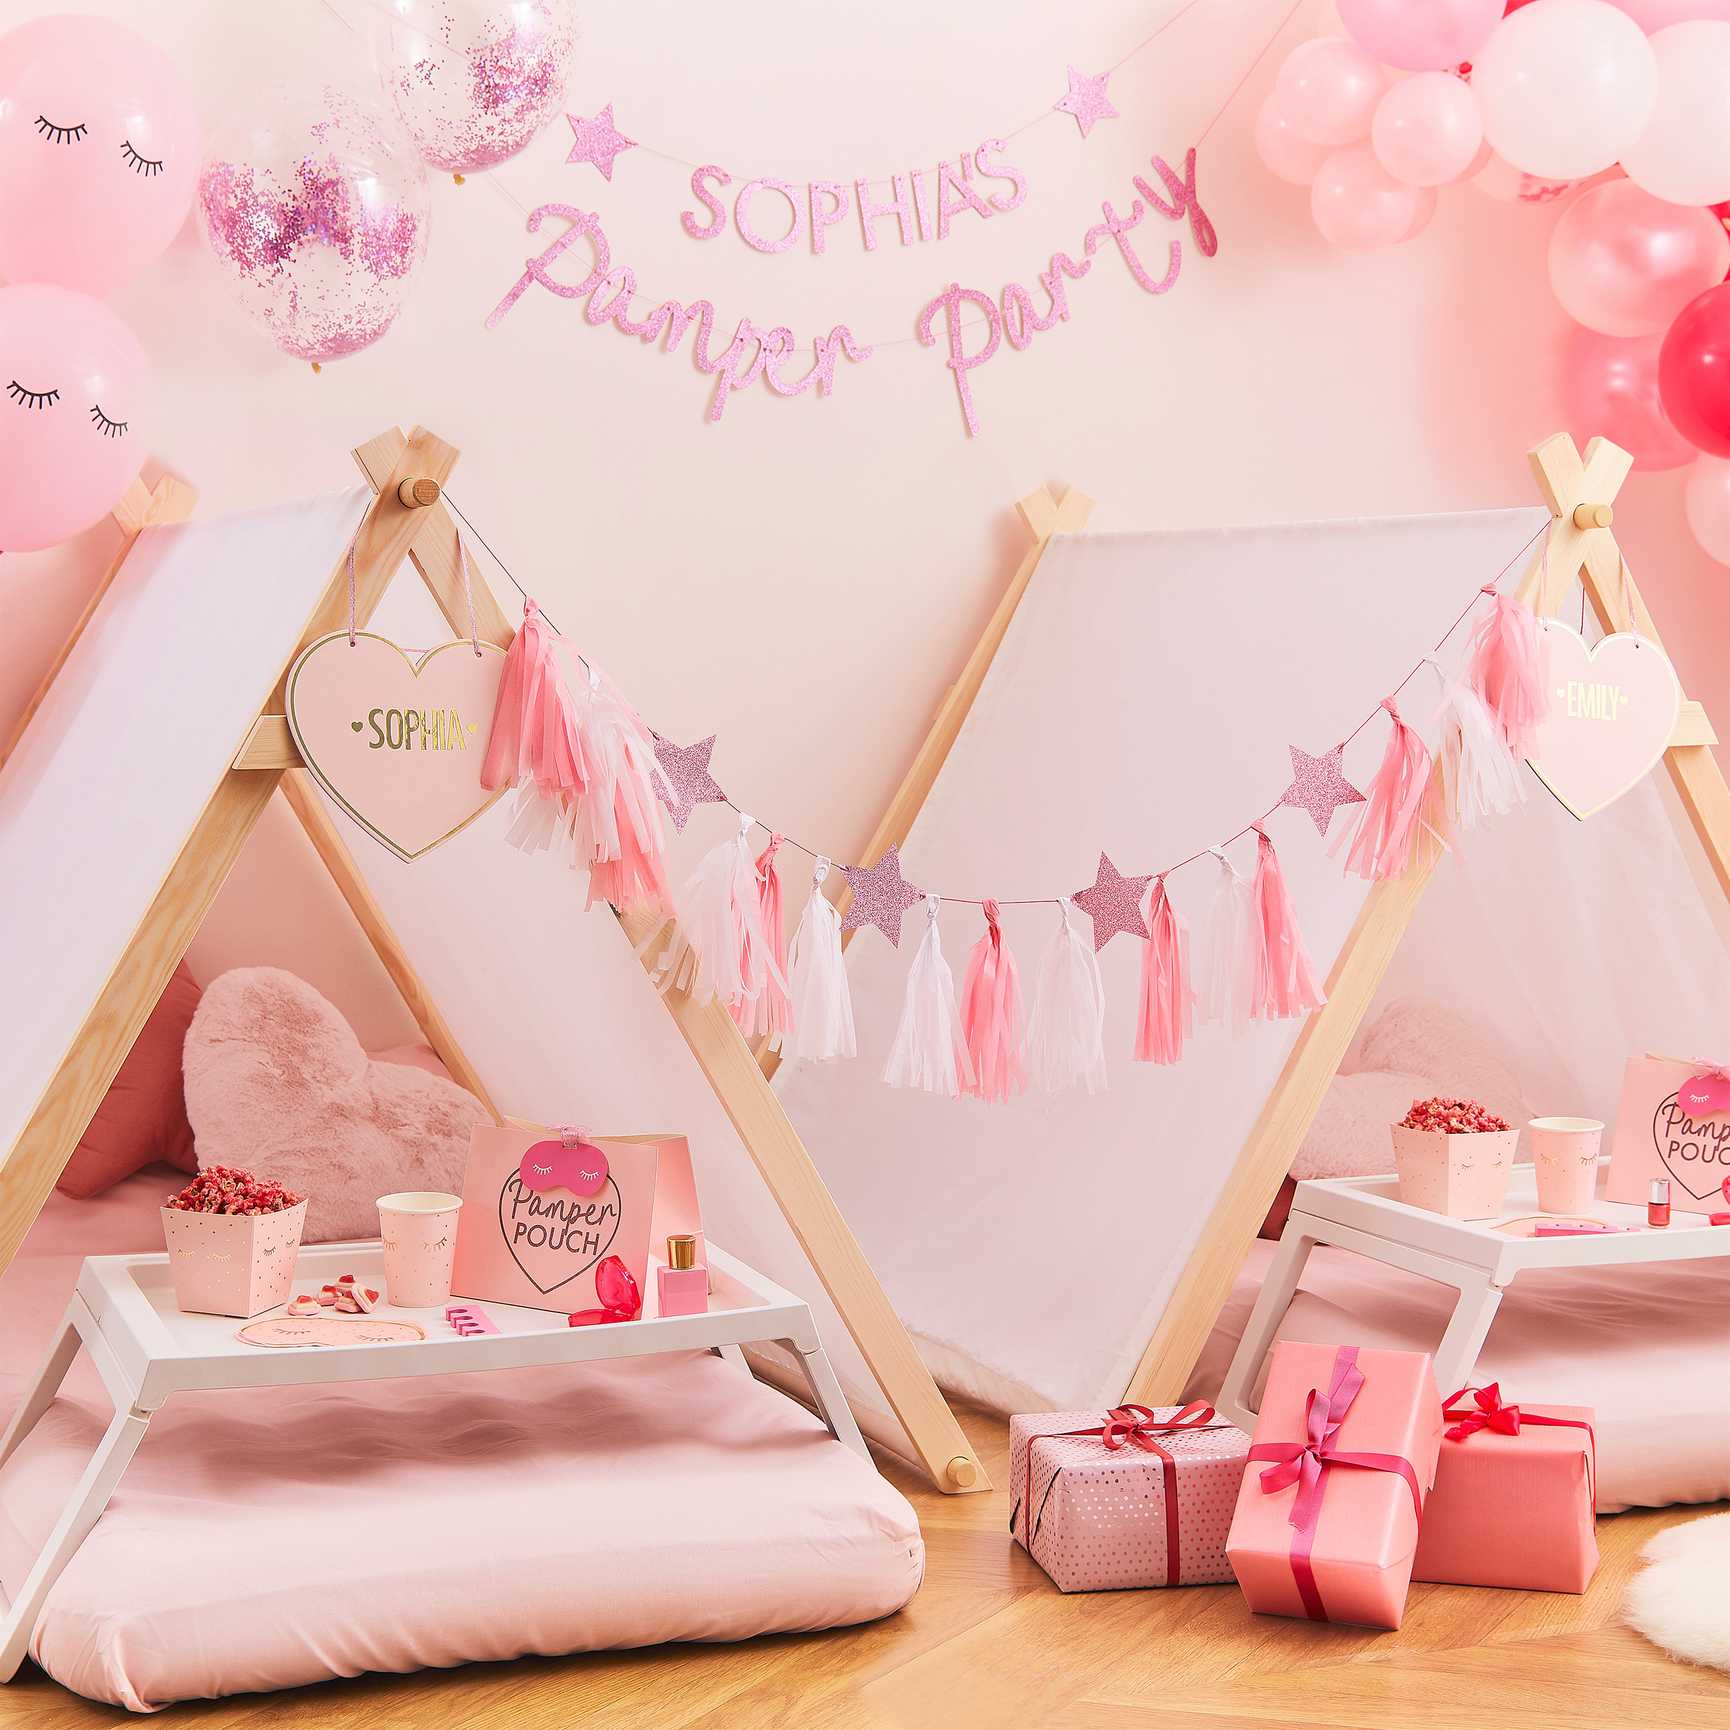 Pamper Party Supplies & Decorations